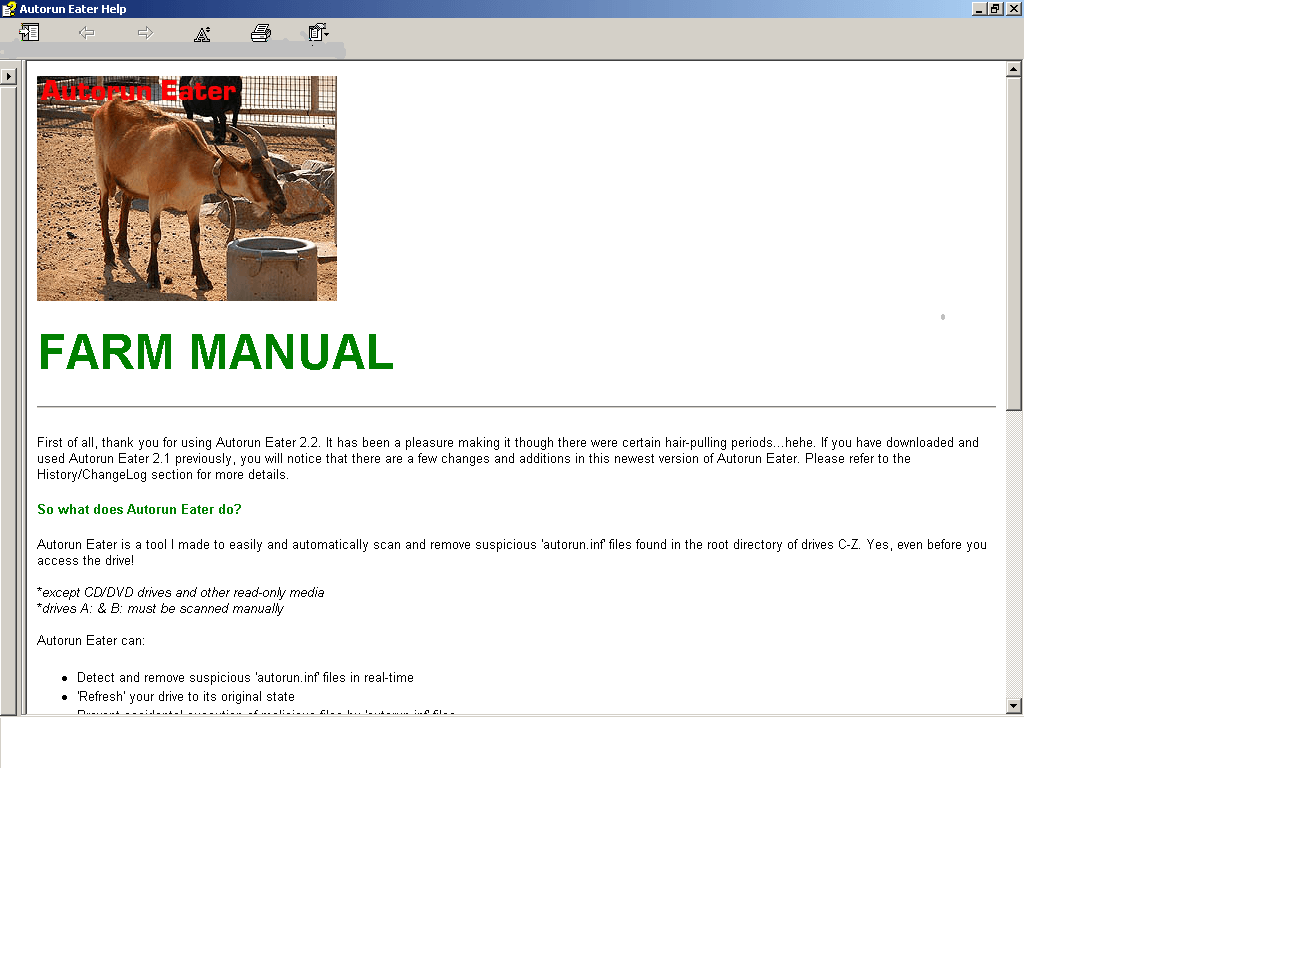 Billy presenting the User's Manual